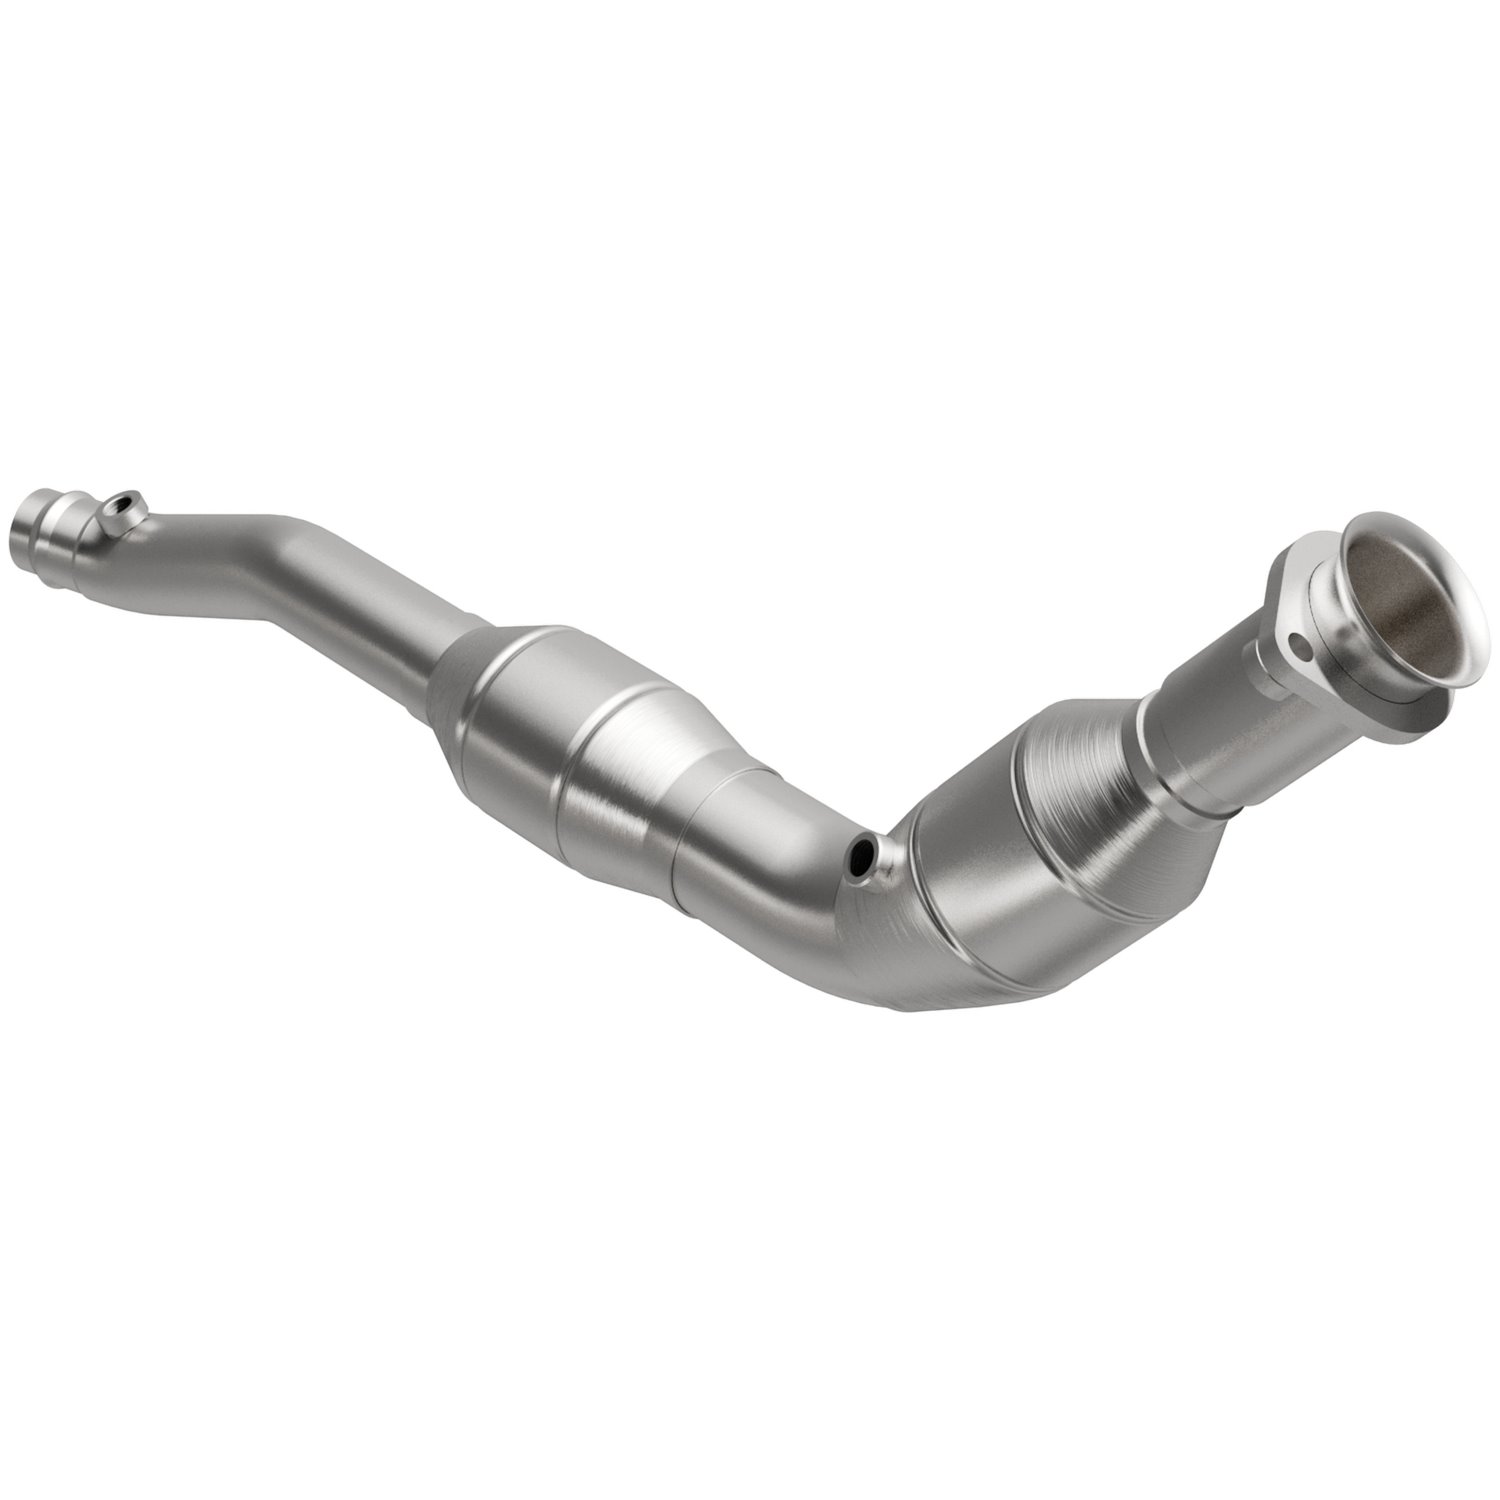 2014-2016 Land Rover LR4 OEM Grade Federal / EPA Compliant Direct-Fit Catalytic Converter